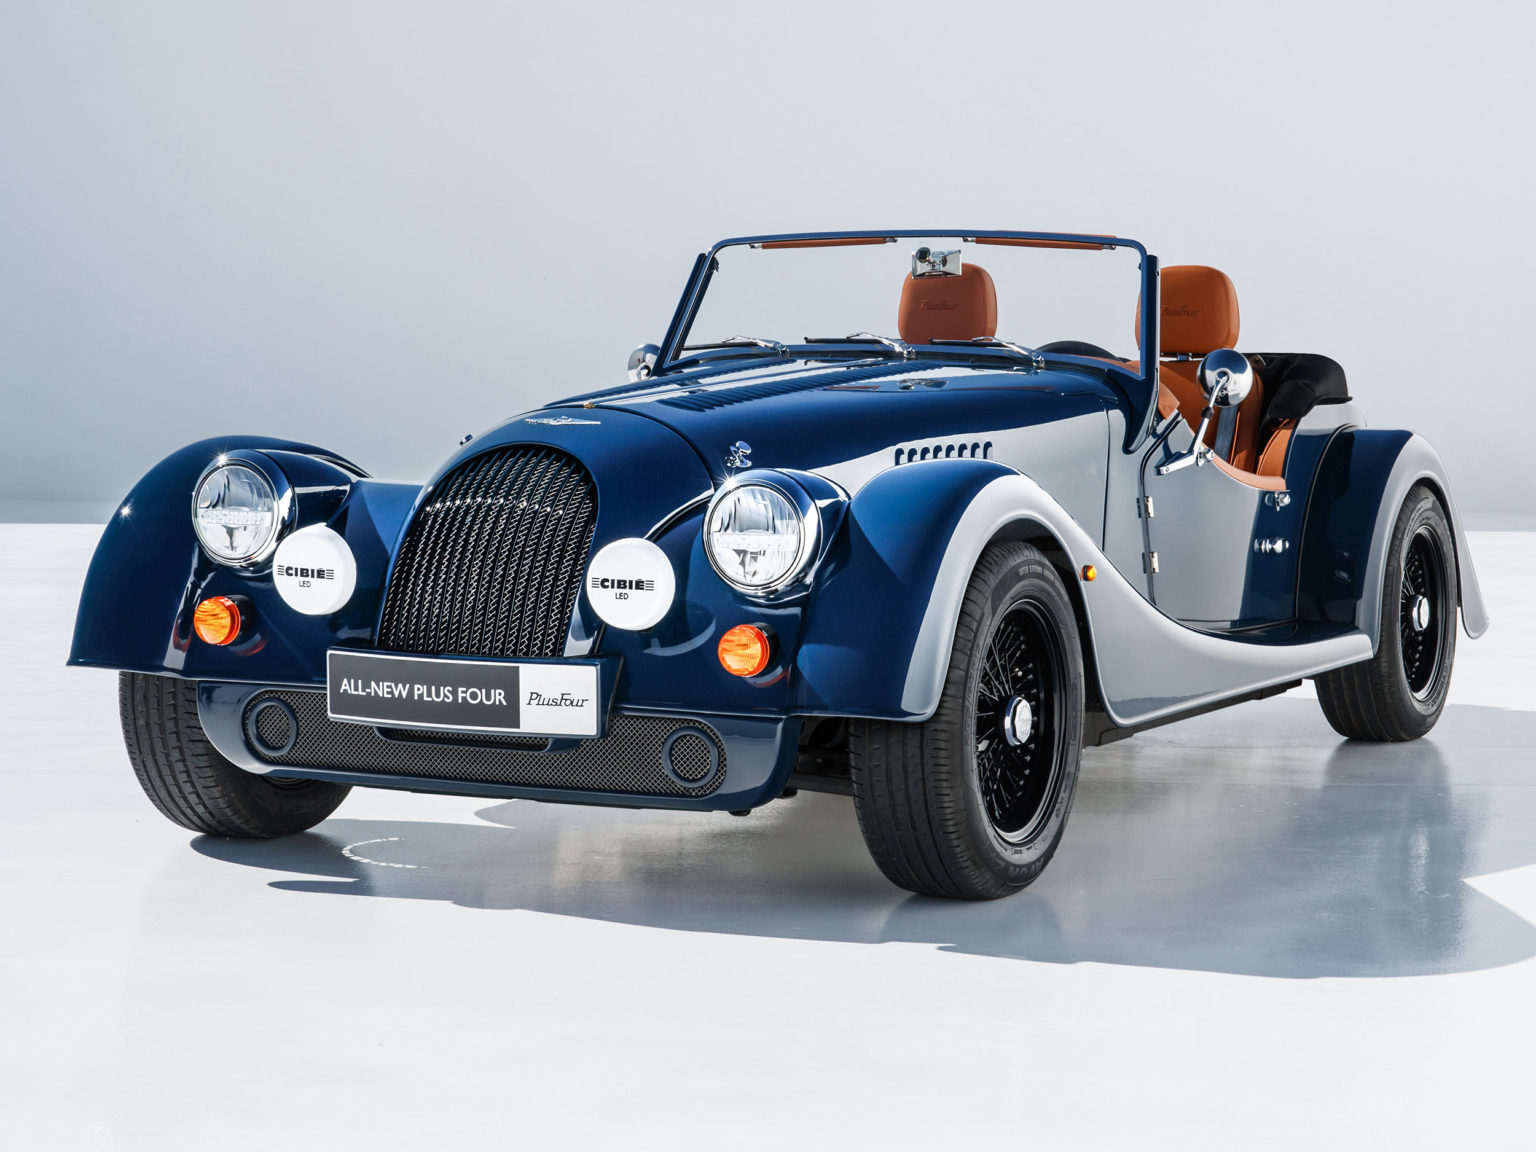 The Plus Four is Morgan's newest car, joining the Plus Six and Plus Three.